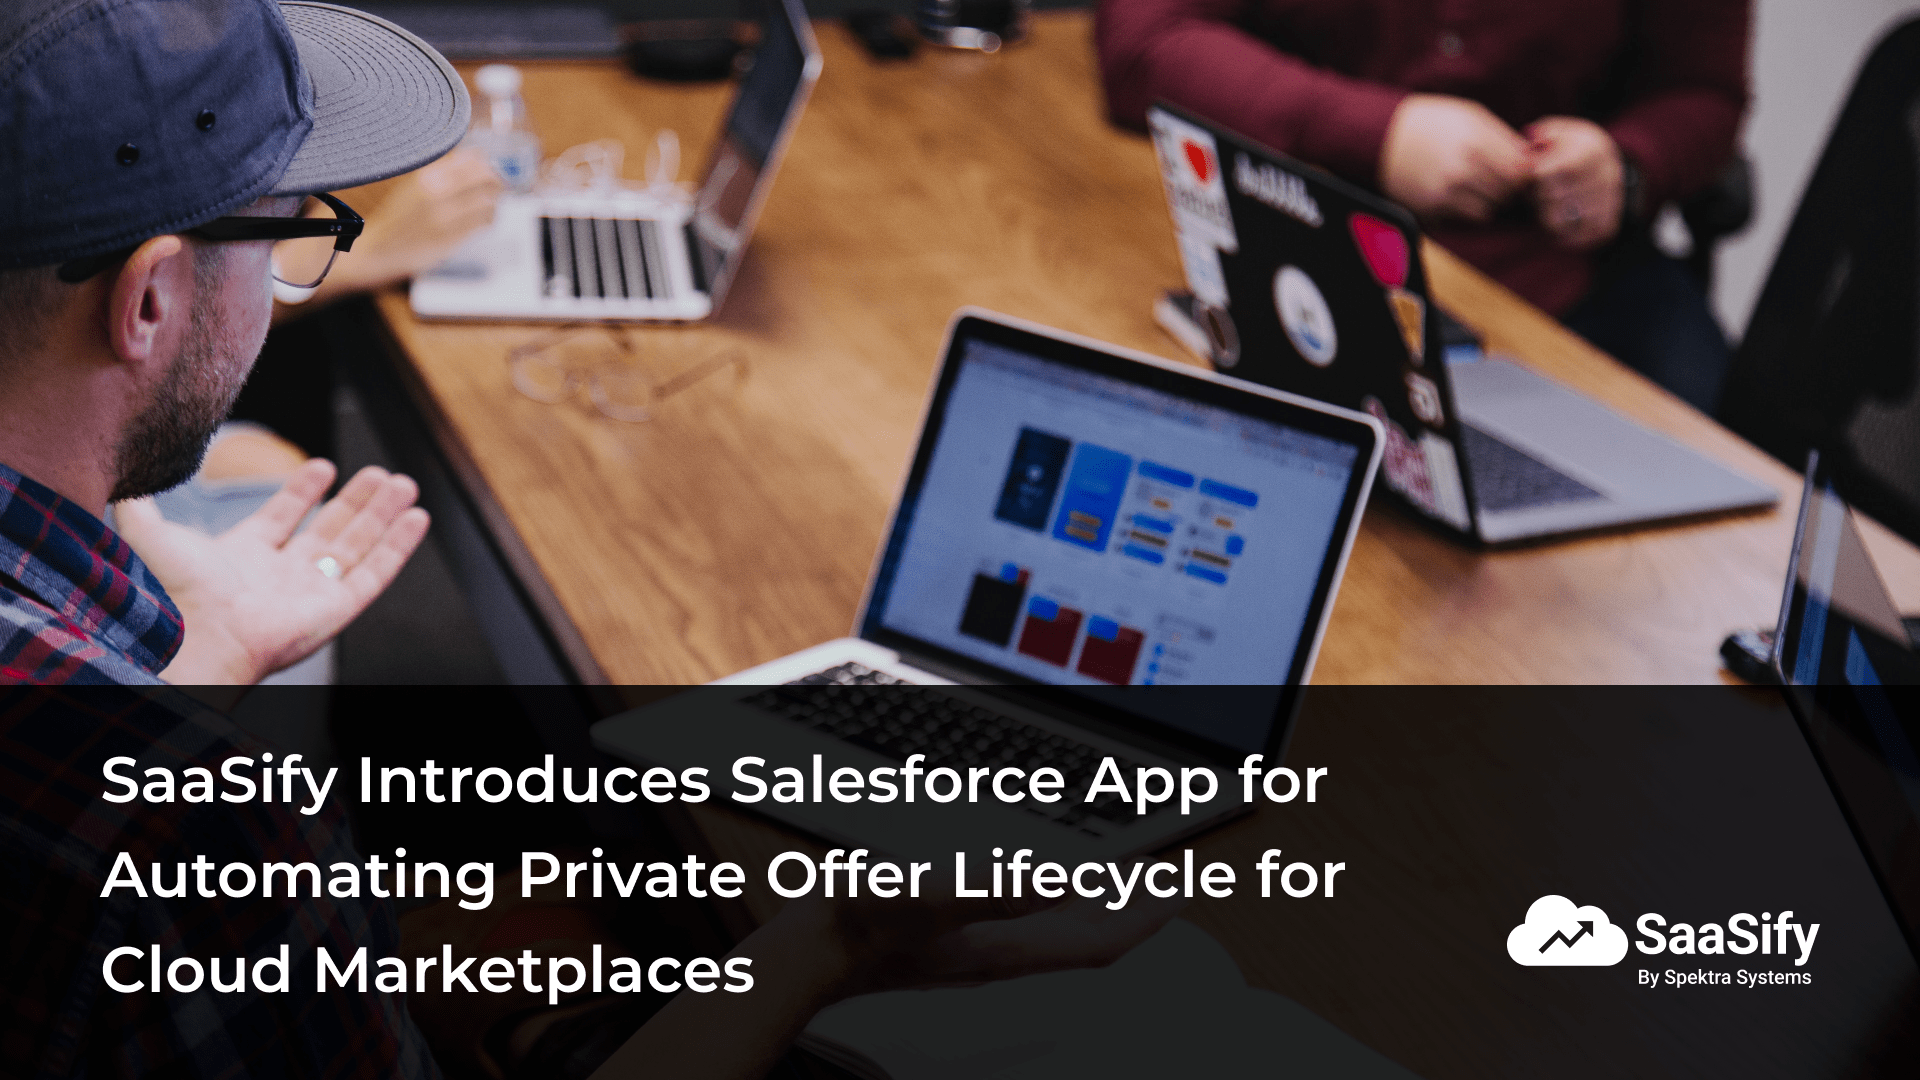 Automating Private Offer Lifecycle for Cloud Marketplaces